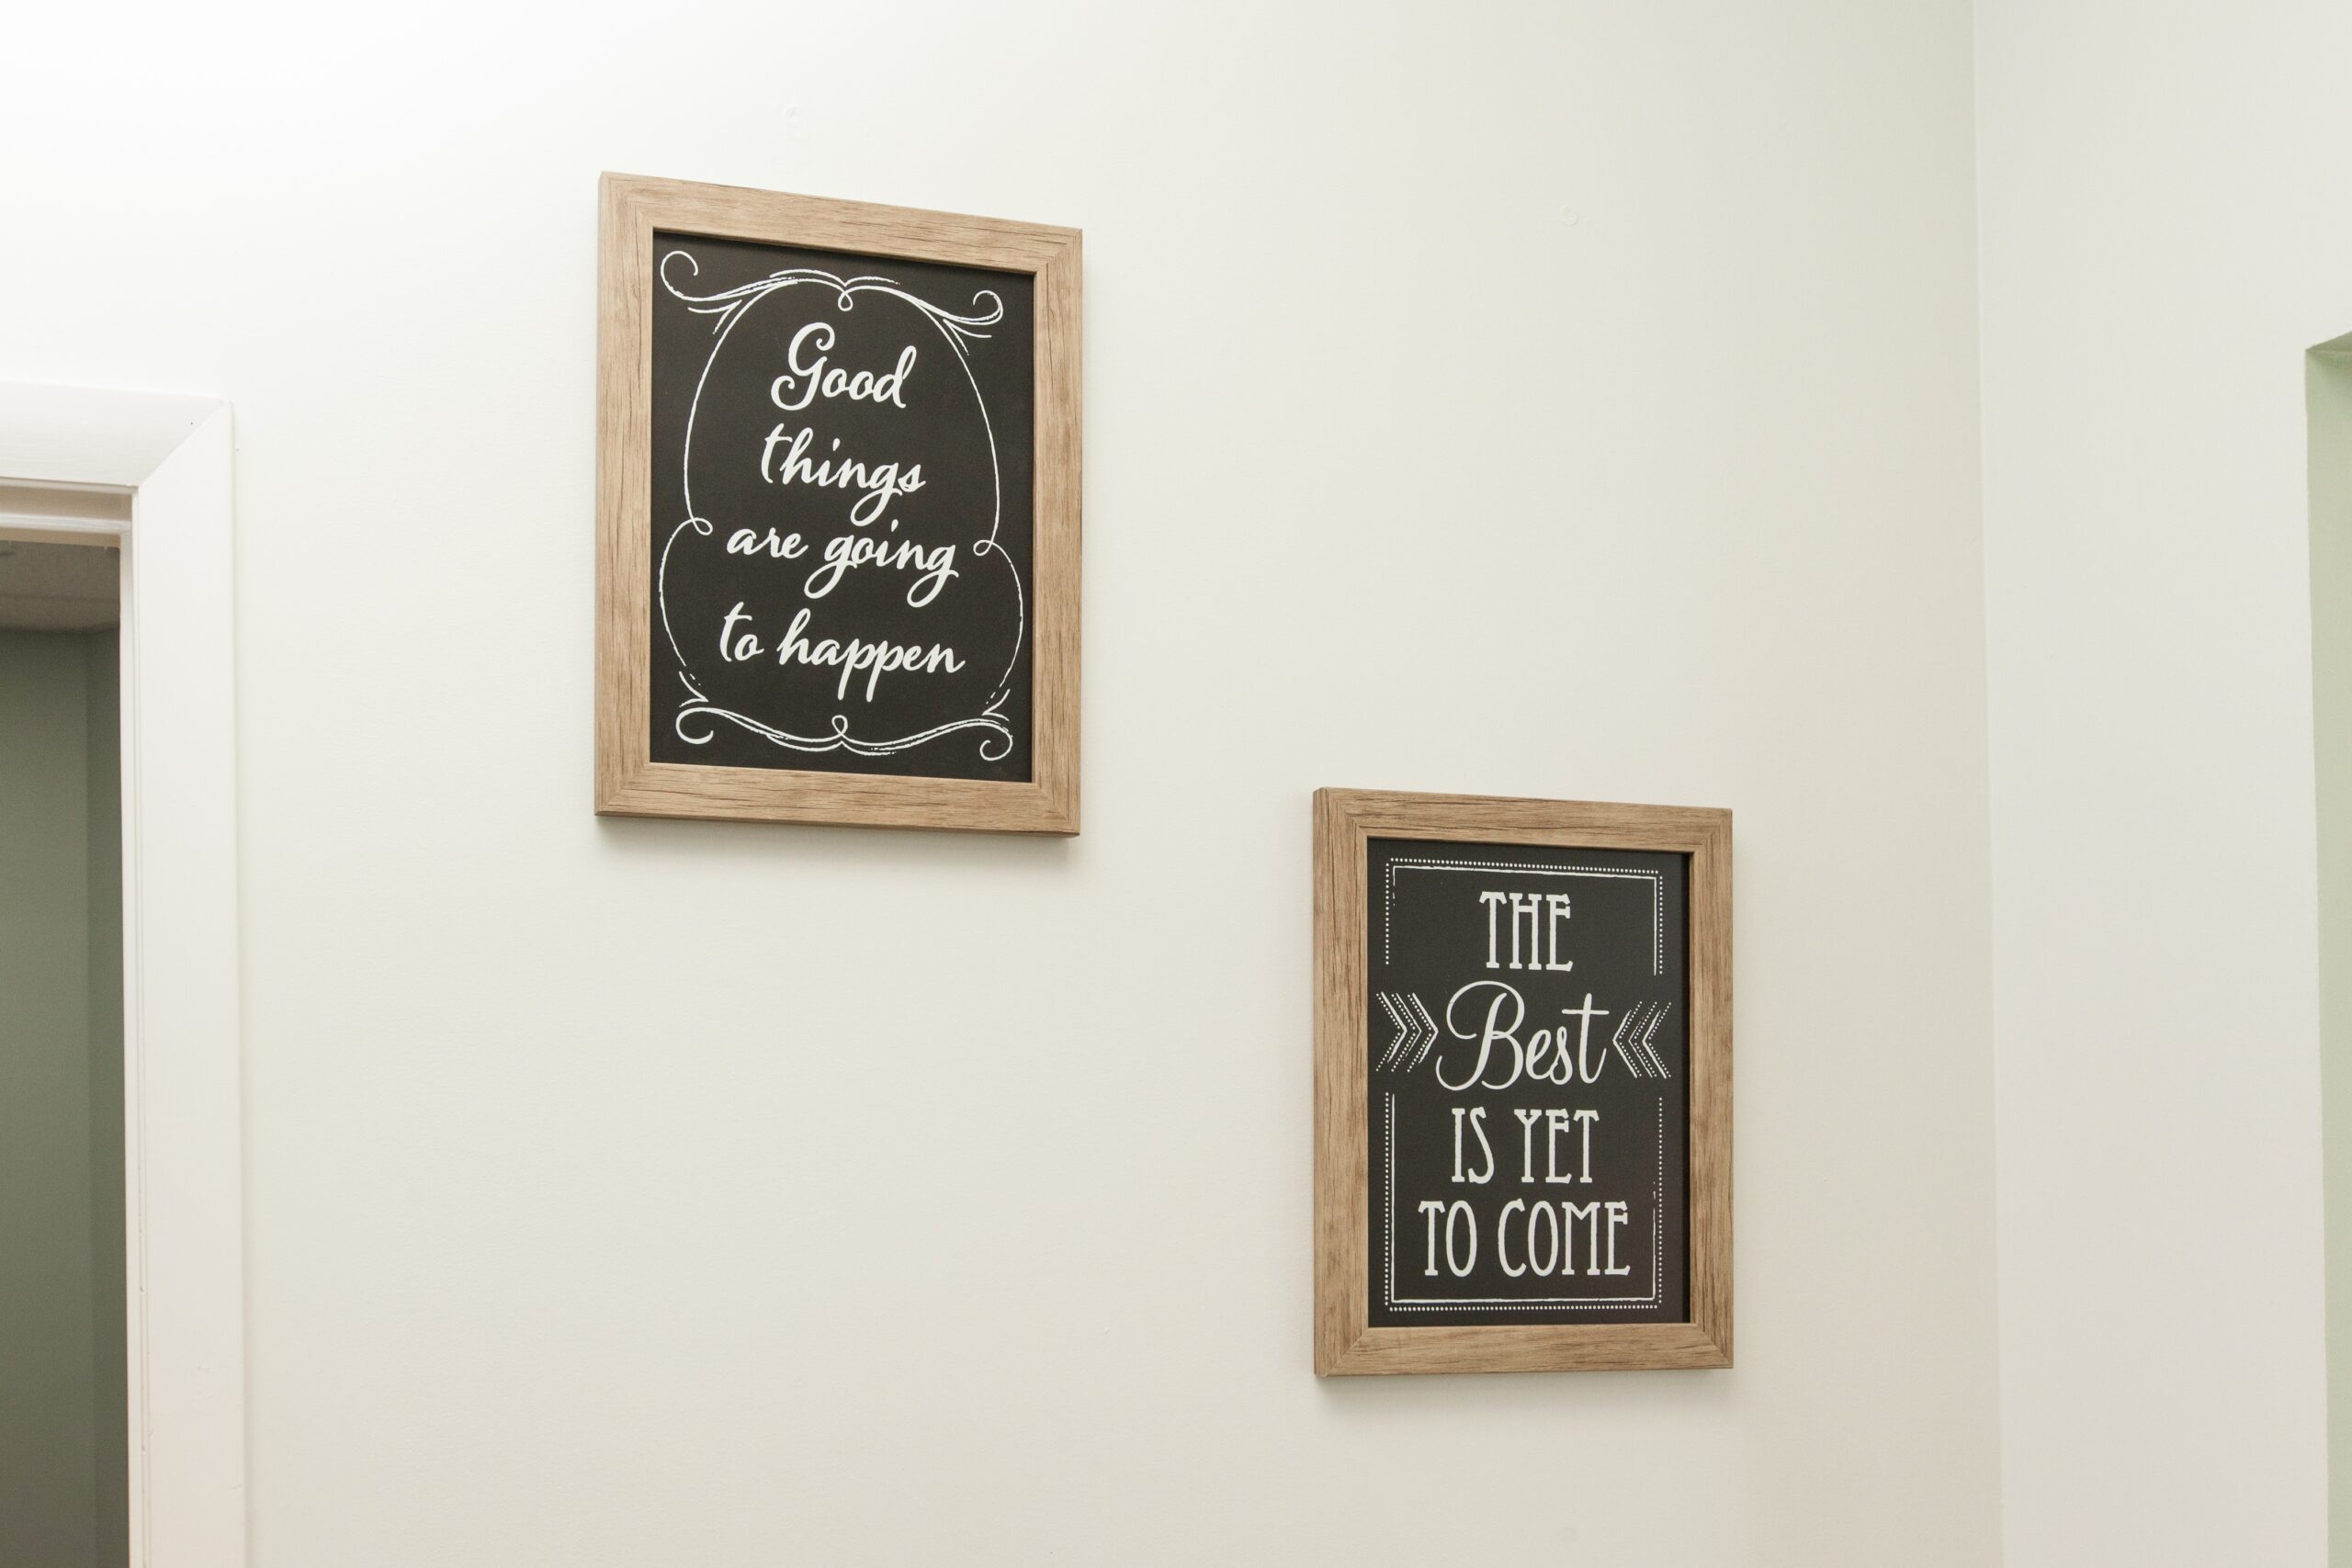 Florida Facilities motivational quotes on picture frames